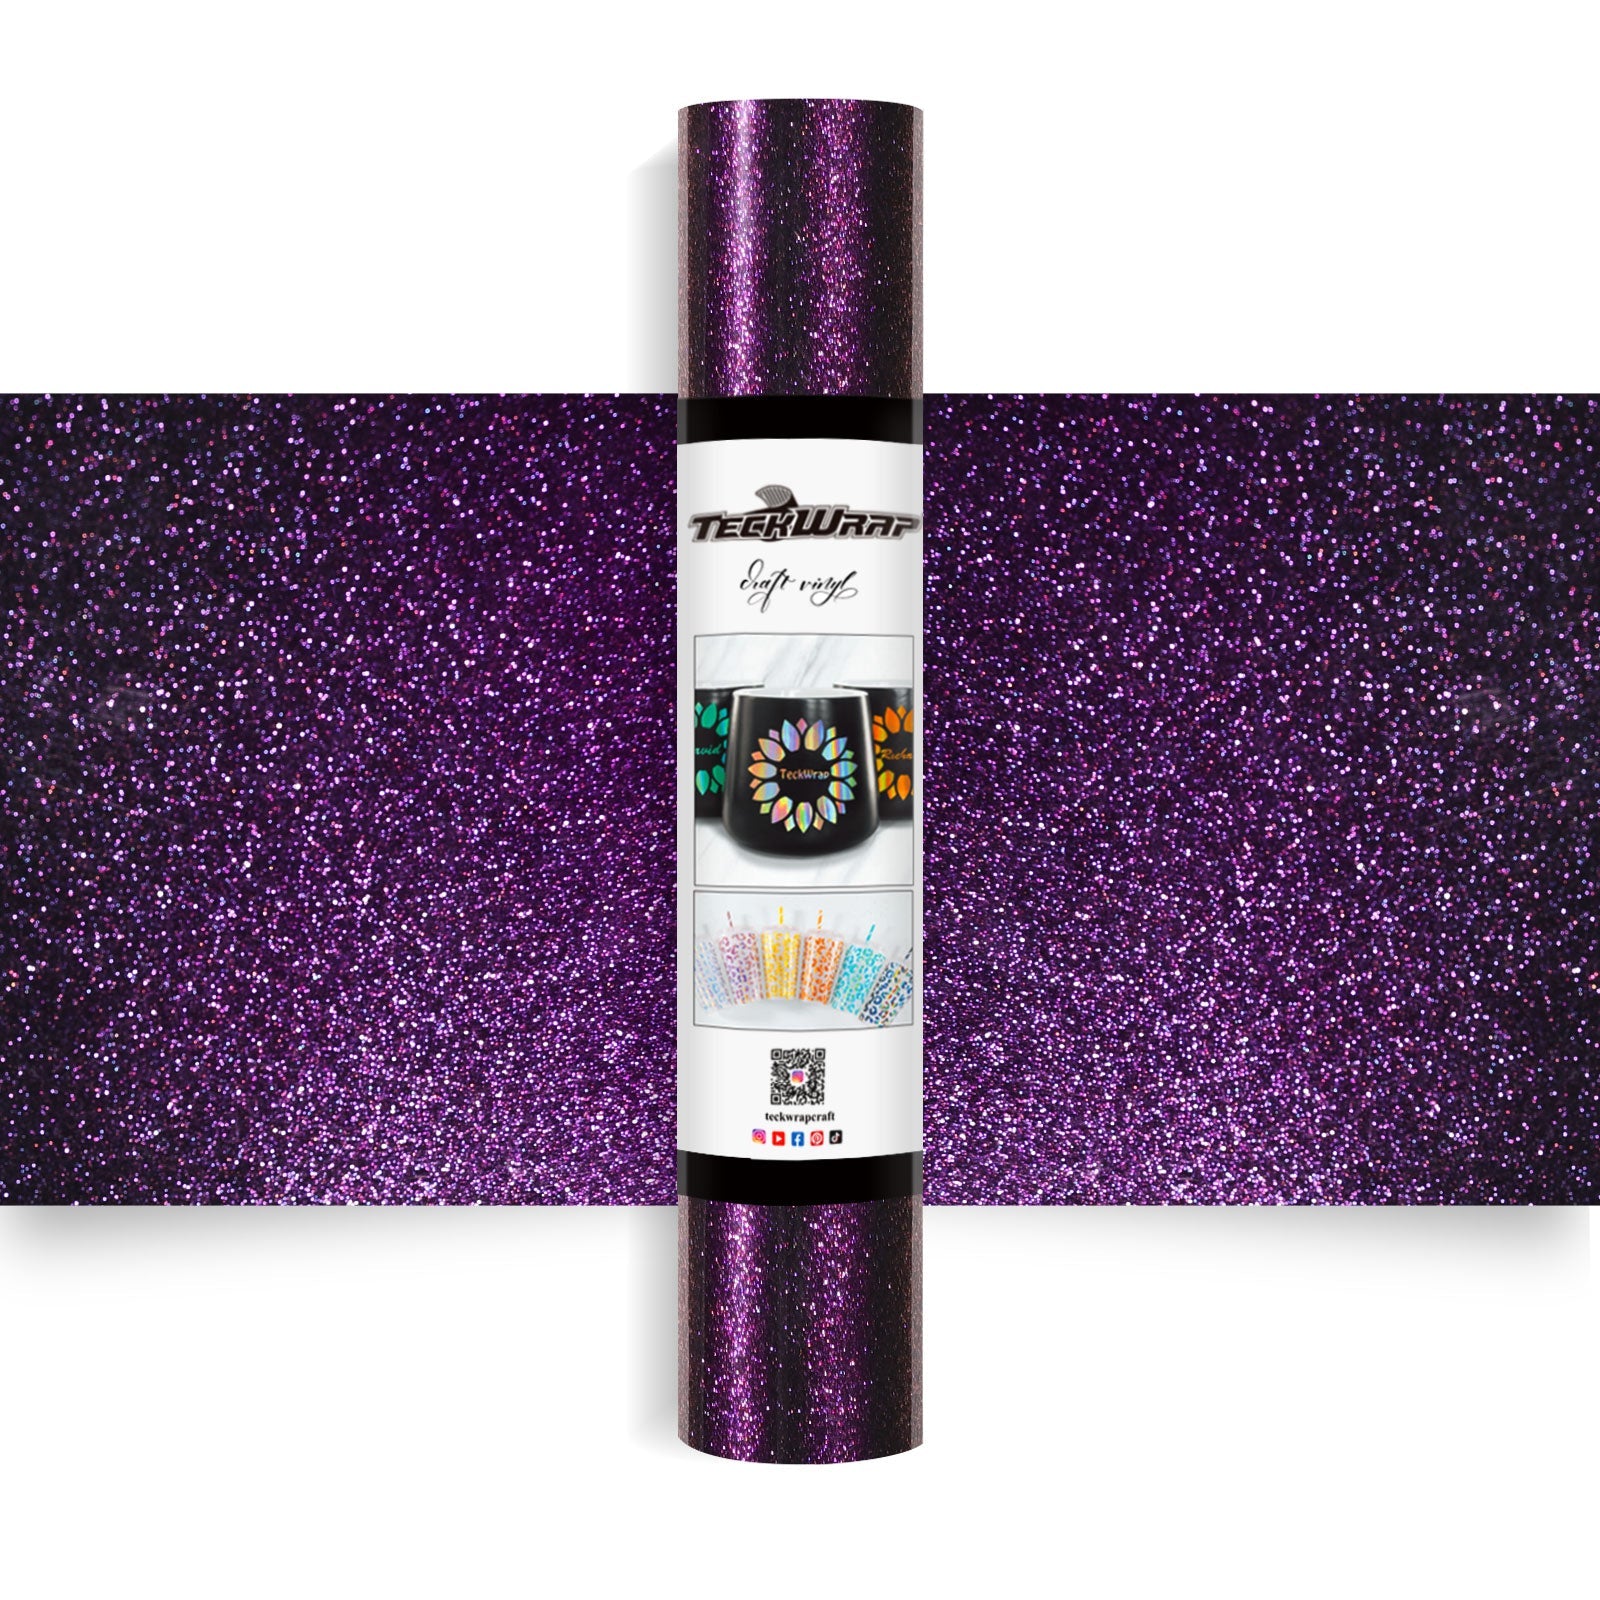  WRAPXPERT Chameleon Metallic Permanent Vinyl Purple 12x5ft  Metallic Adhesive Vinyl Roll Easy Cut and Weed Gradient Color Change Vinyl  for Crafts Signs Lettering Graphics : Arts, Crafts & Sewing